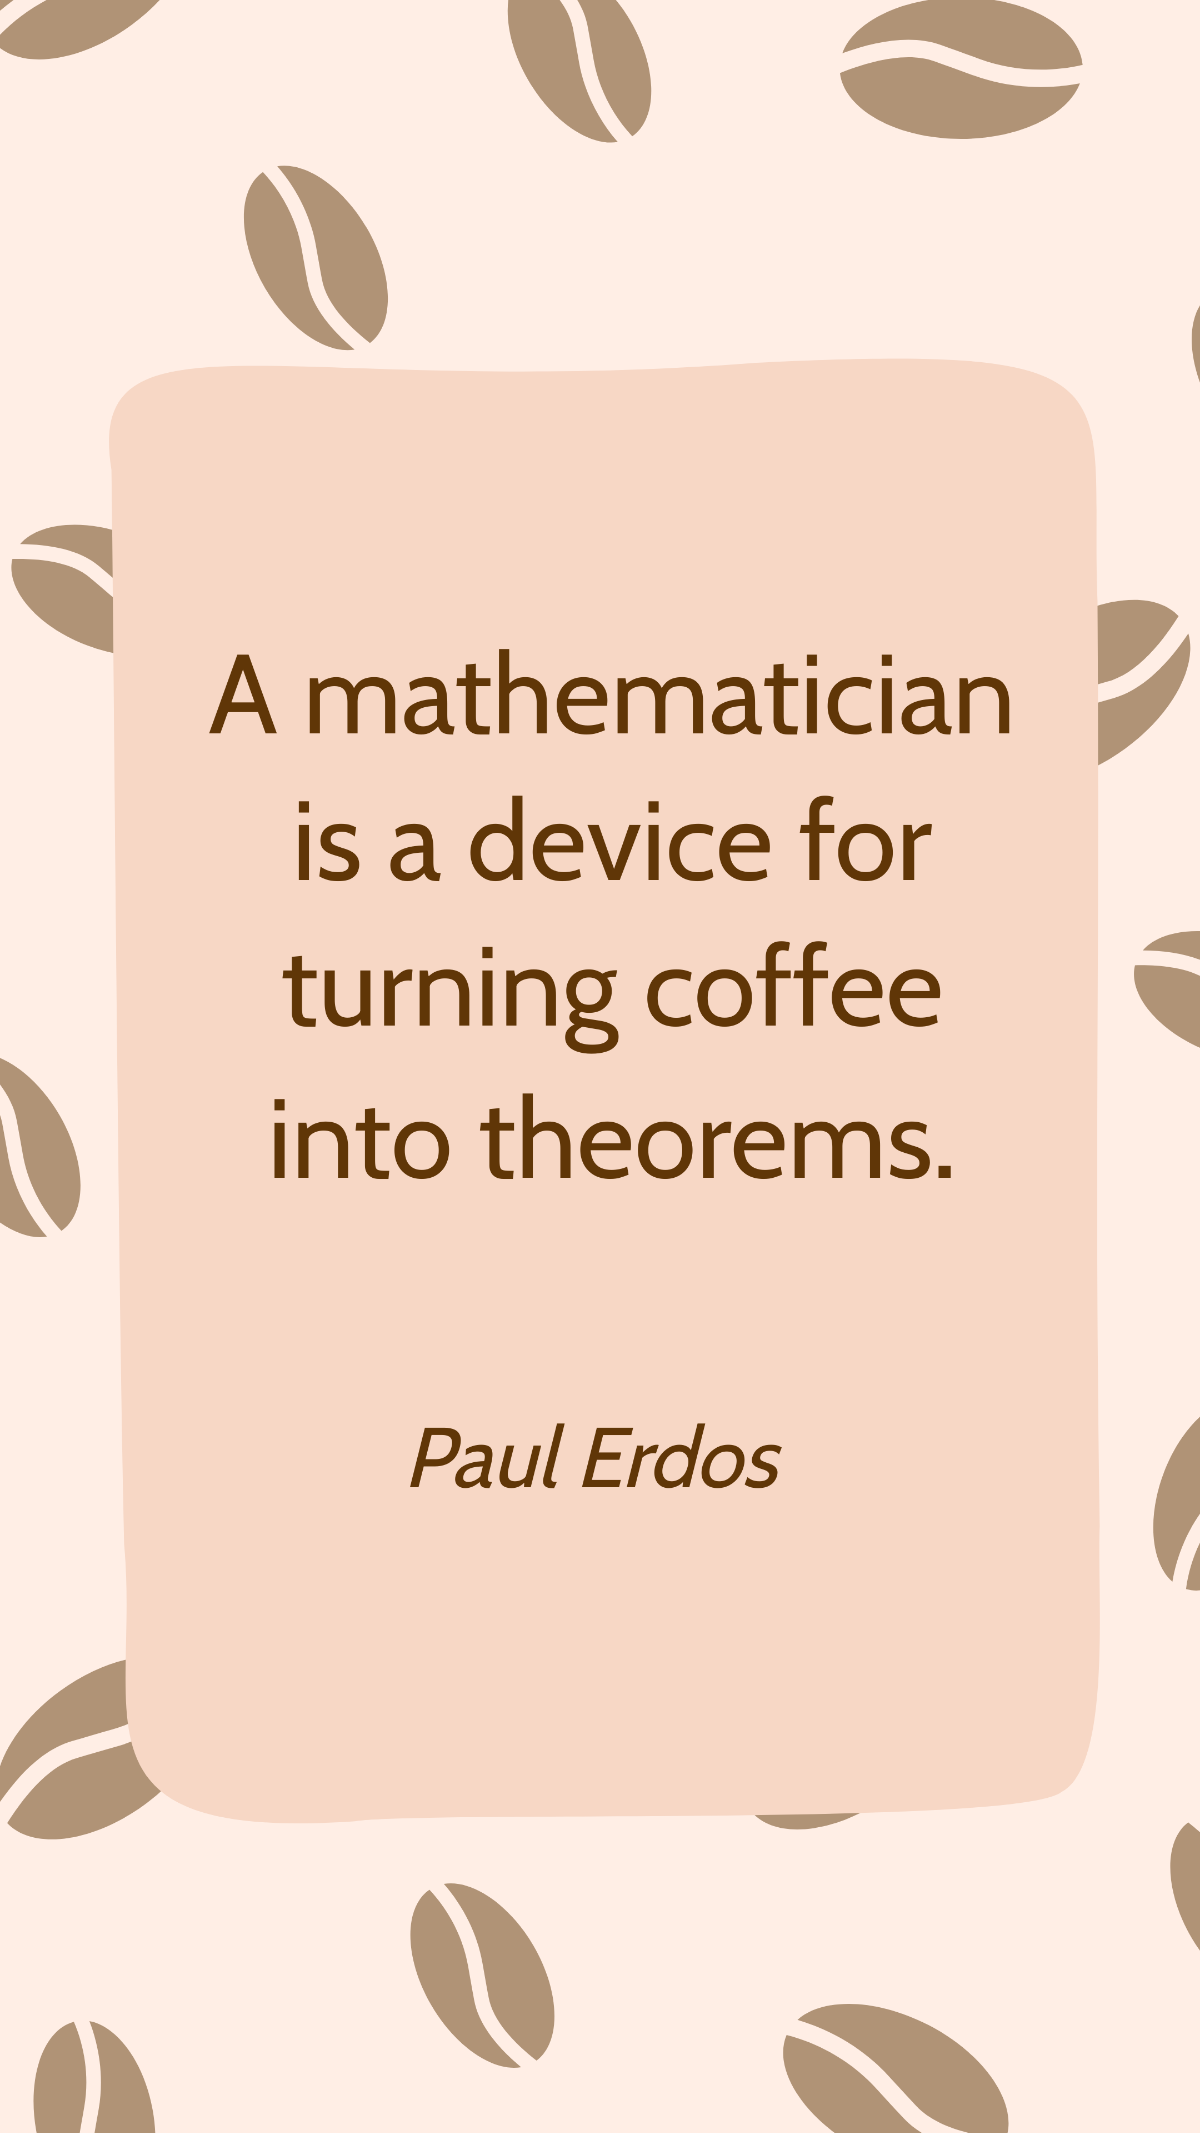 Paul Erdos - A mathematician is a device for turning coffee into theorems. Template